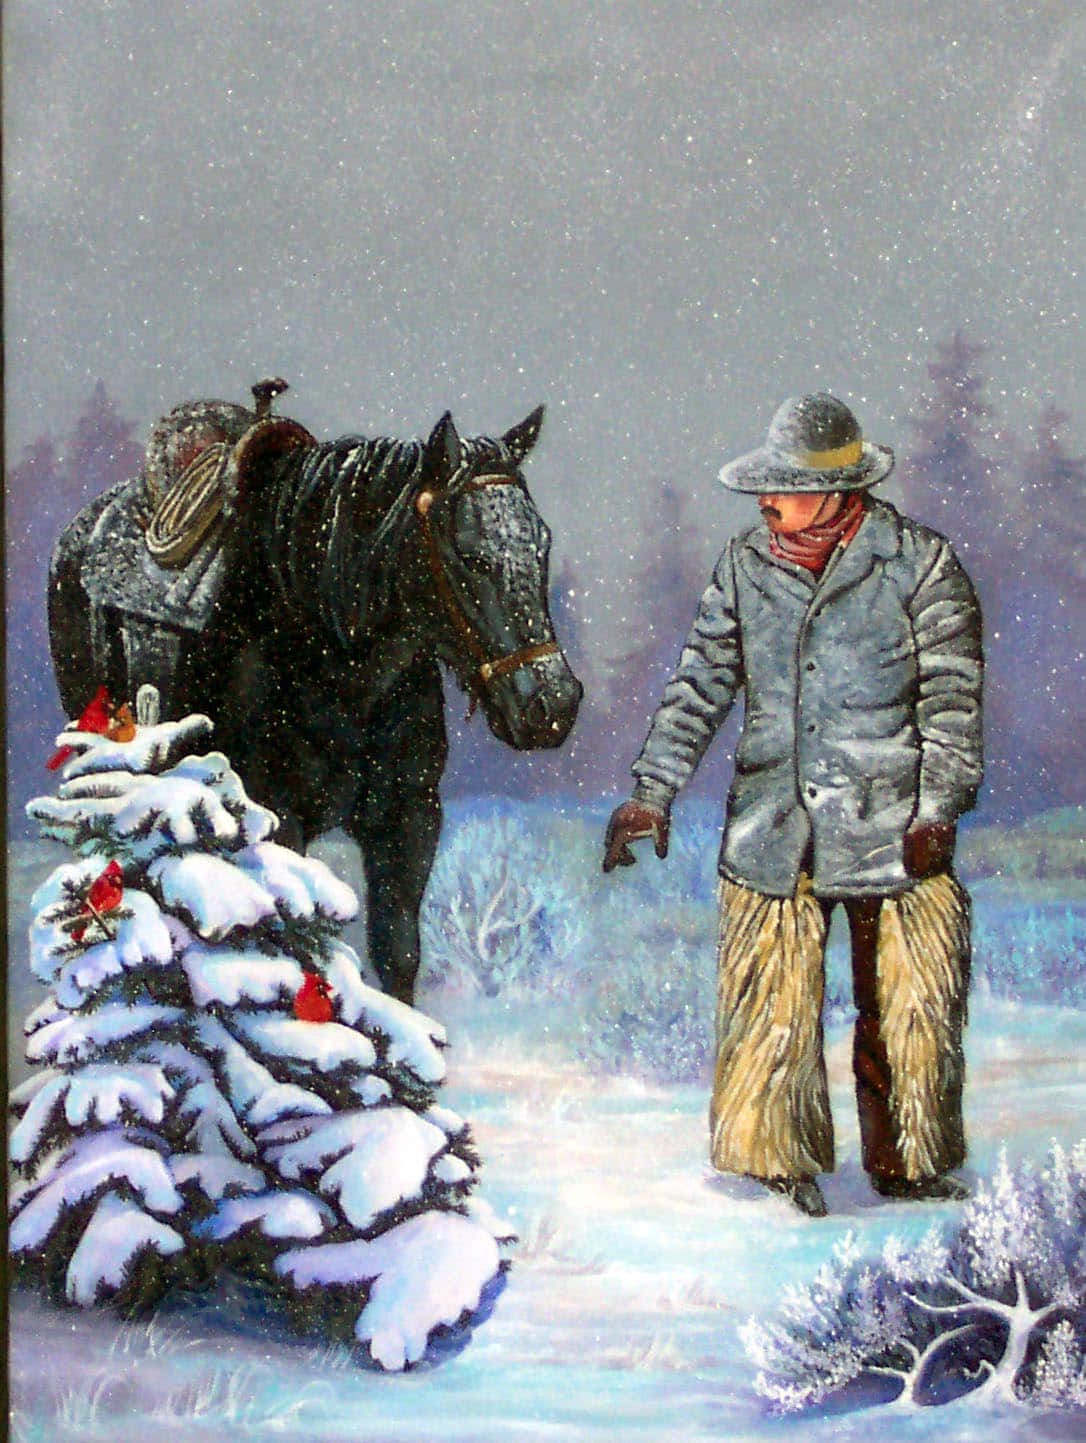 Cowboy Spending a Warm Christmas Morning at Home Wallpaper